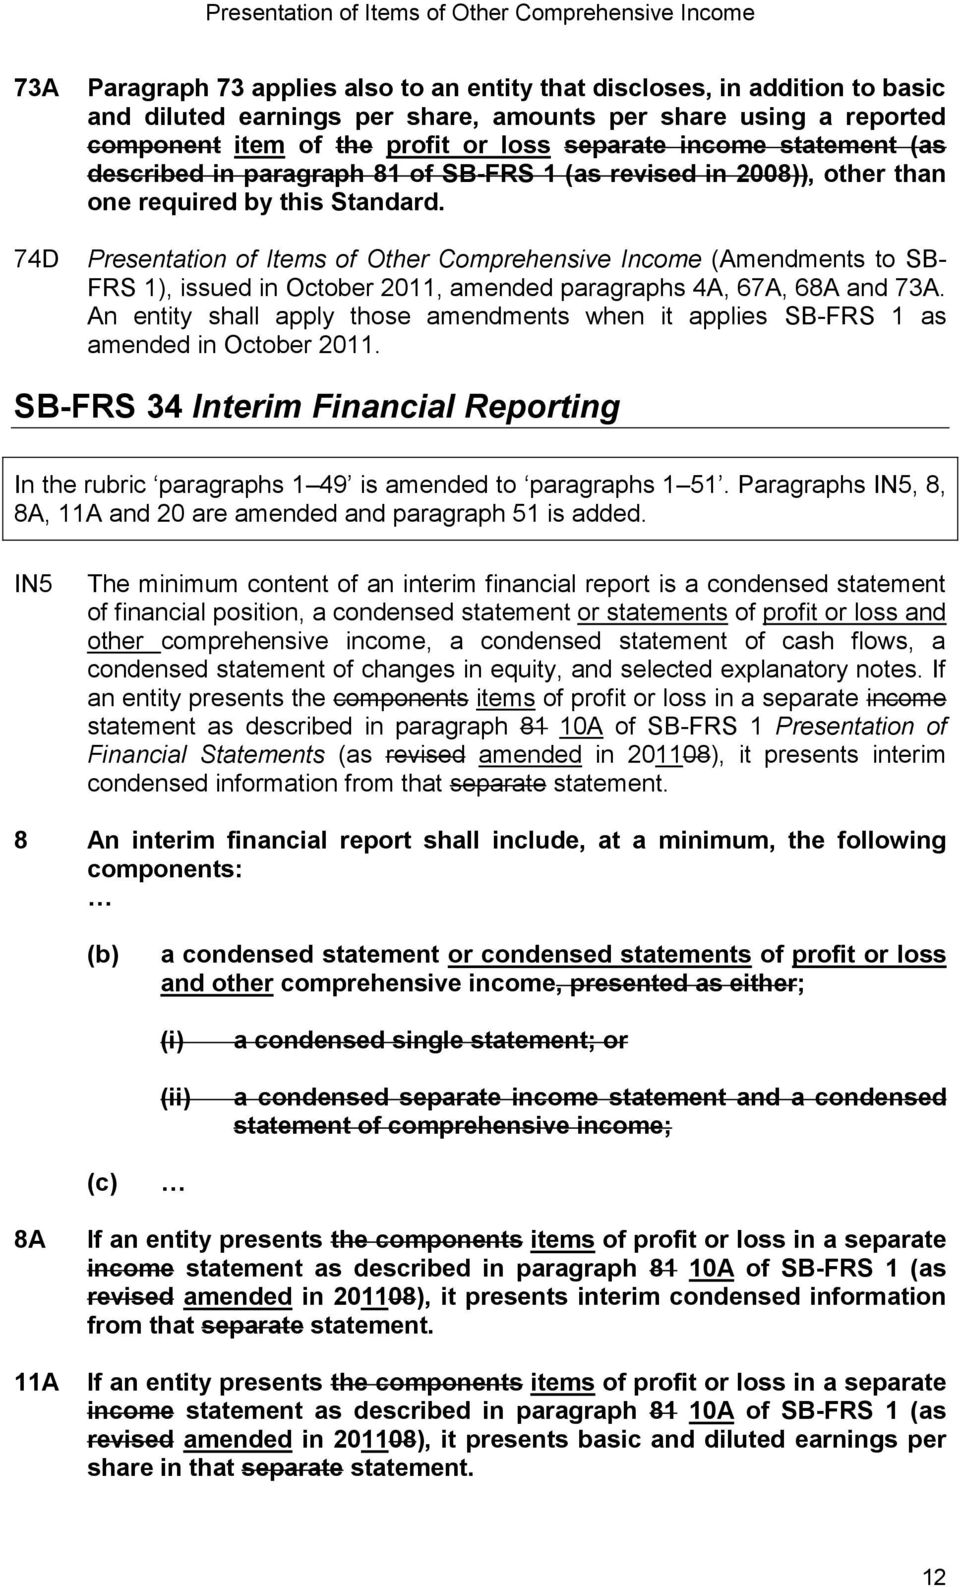 Presentation of Items of Other Comprehensive Income (Amendments to SB- FRS 1), issued in October 2011, amended paragraphs 4A, 67A, 68A and 73A.